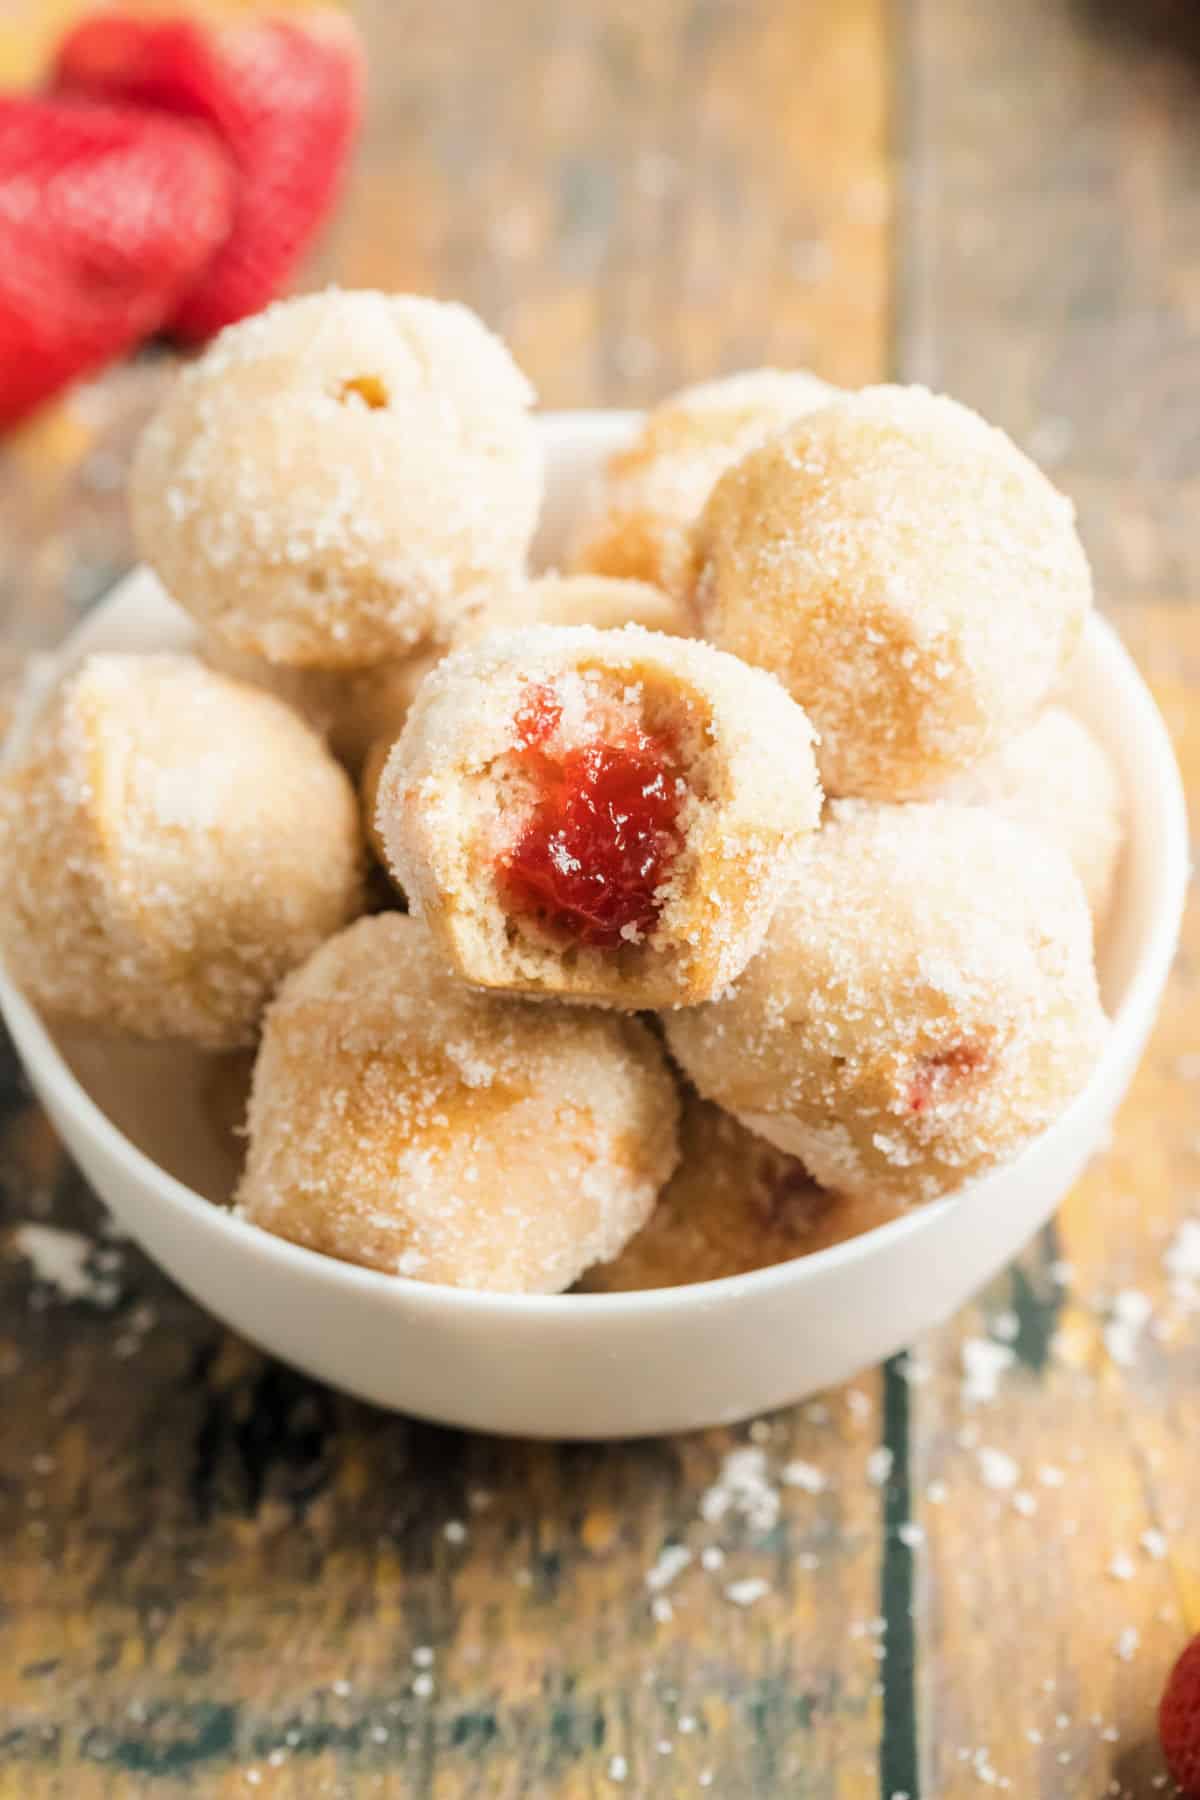 Jelly filled sugar coated donut holes in a white bowl.